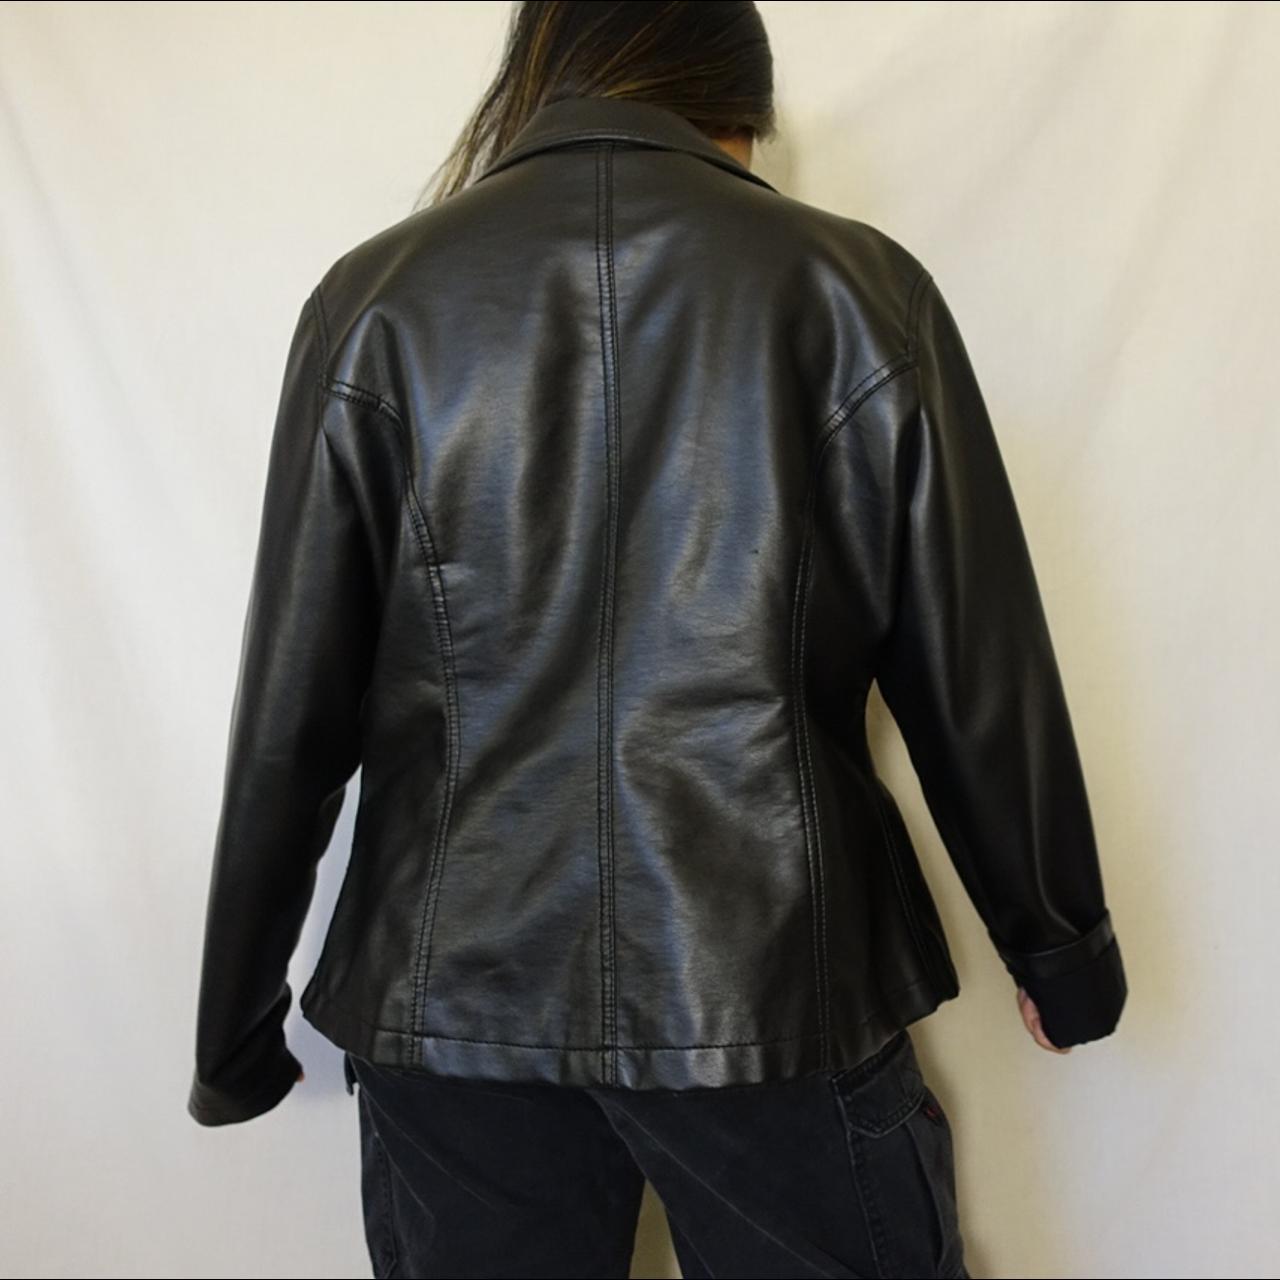 American Vintage Women's Black and Silver Jacket (4)